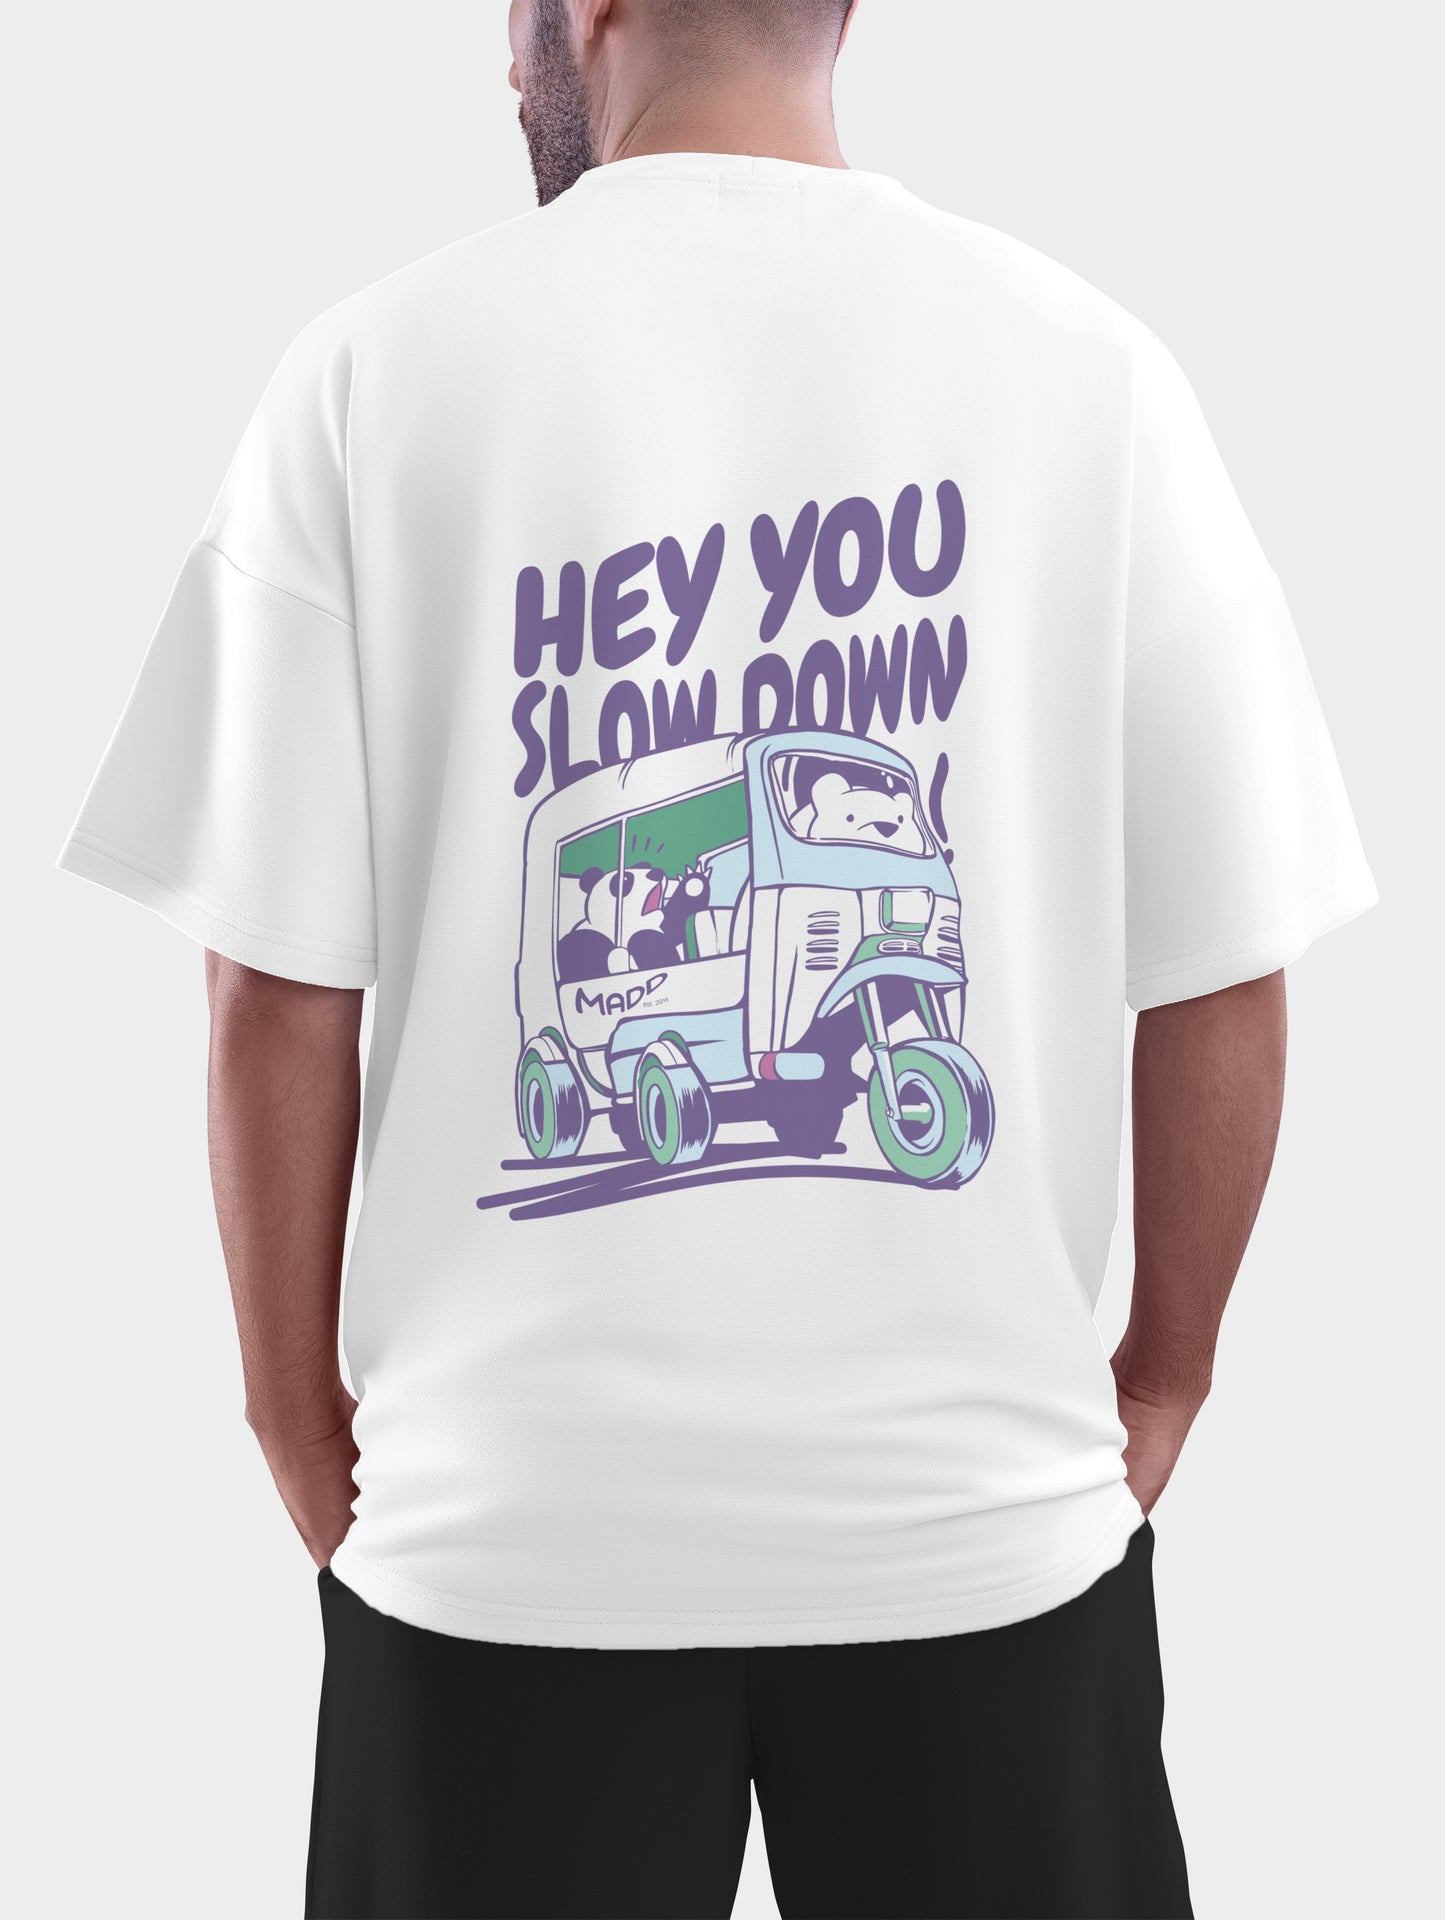 slow down oversized tshirt mad